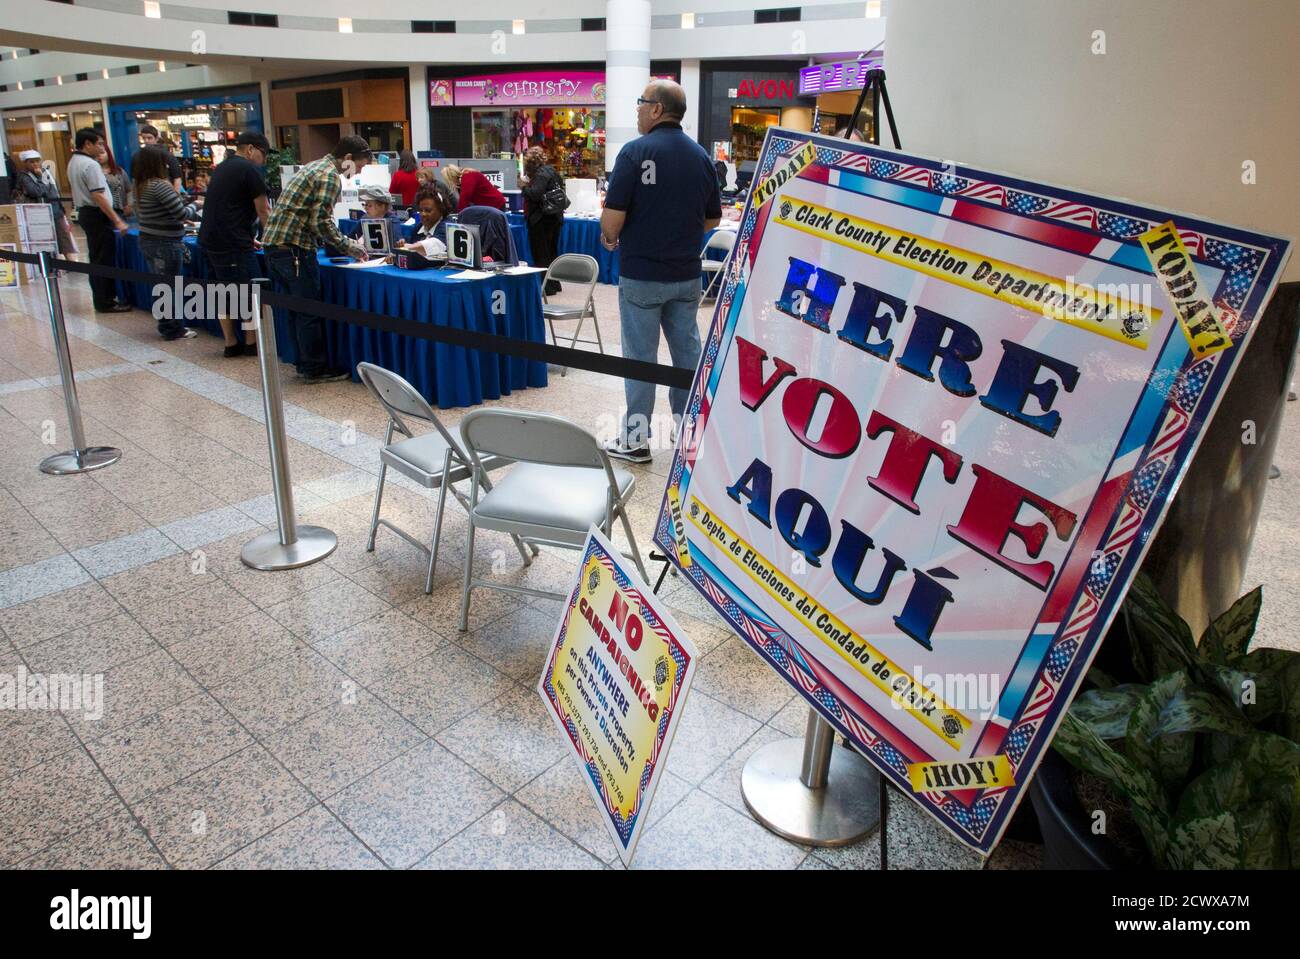 Voters sign in at an early voting location in the Boulevard Mall in Las Vegas, Nevada October 26, 2012. REUTERS/Steve Marcus (UNITED STATES - Tags: POLITICS ELECTIONS USA PRESIDENTIAL ELECTION) Stock Photo